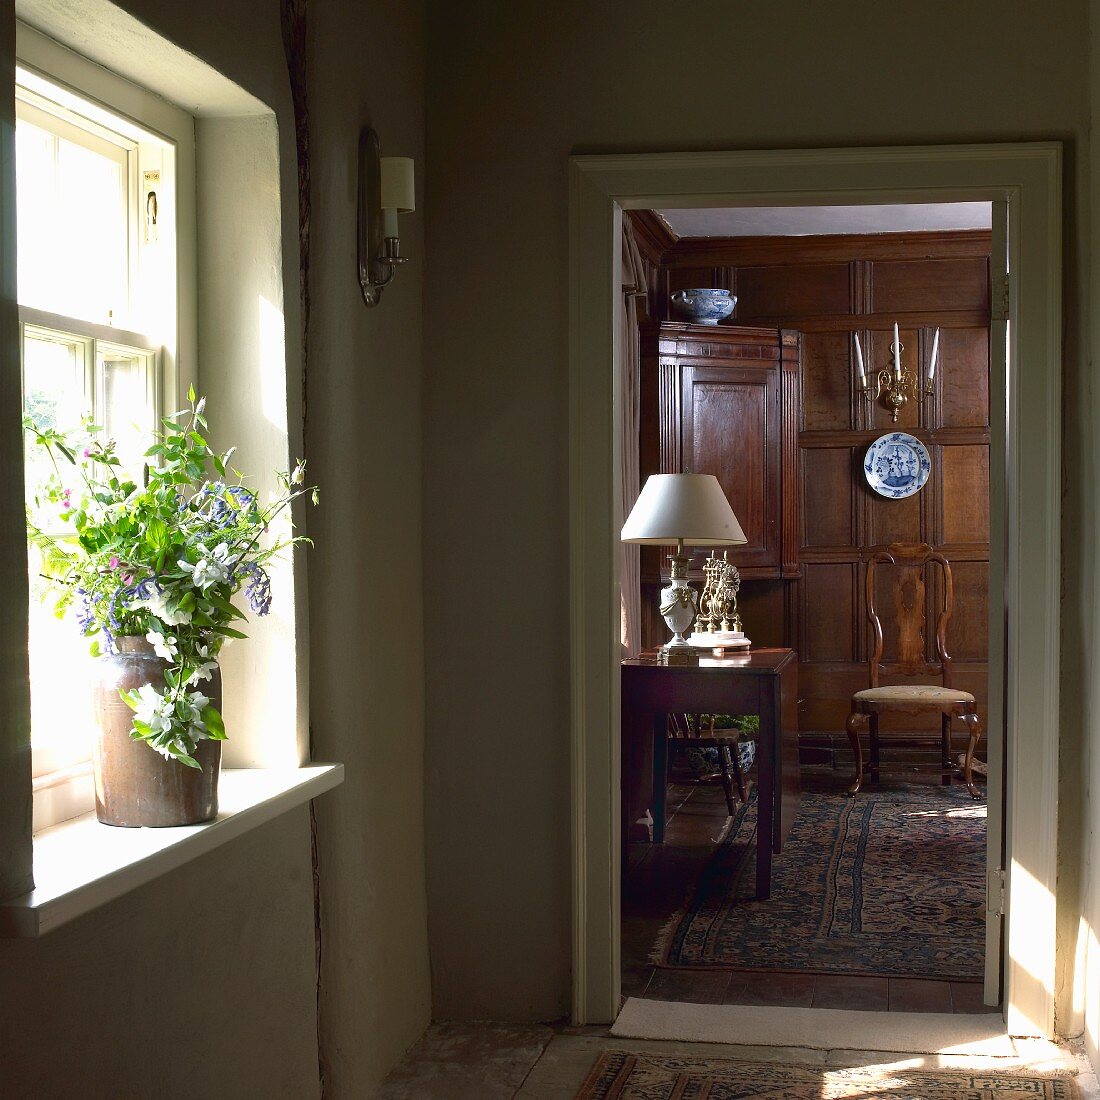 View through open interior door into dignified interior with solid wooden panelling